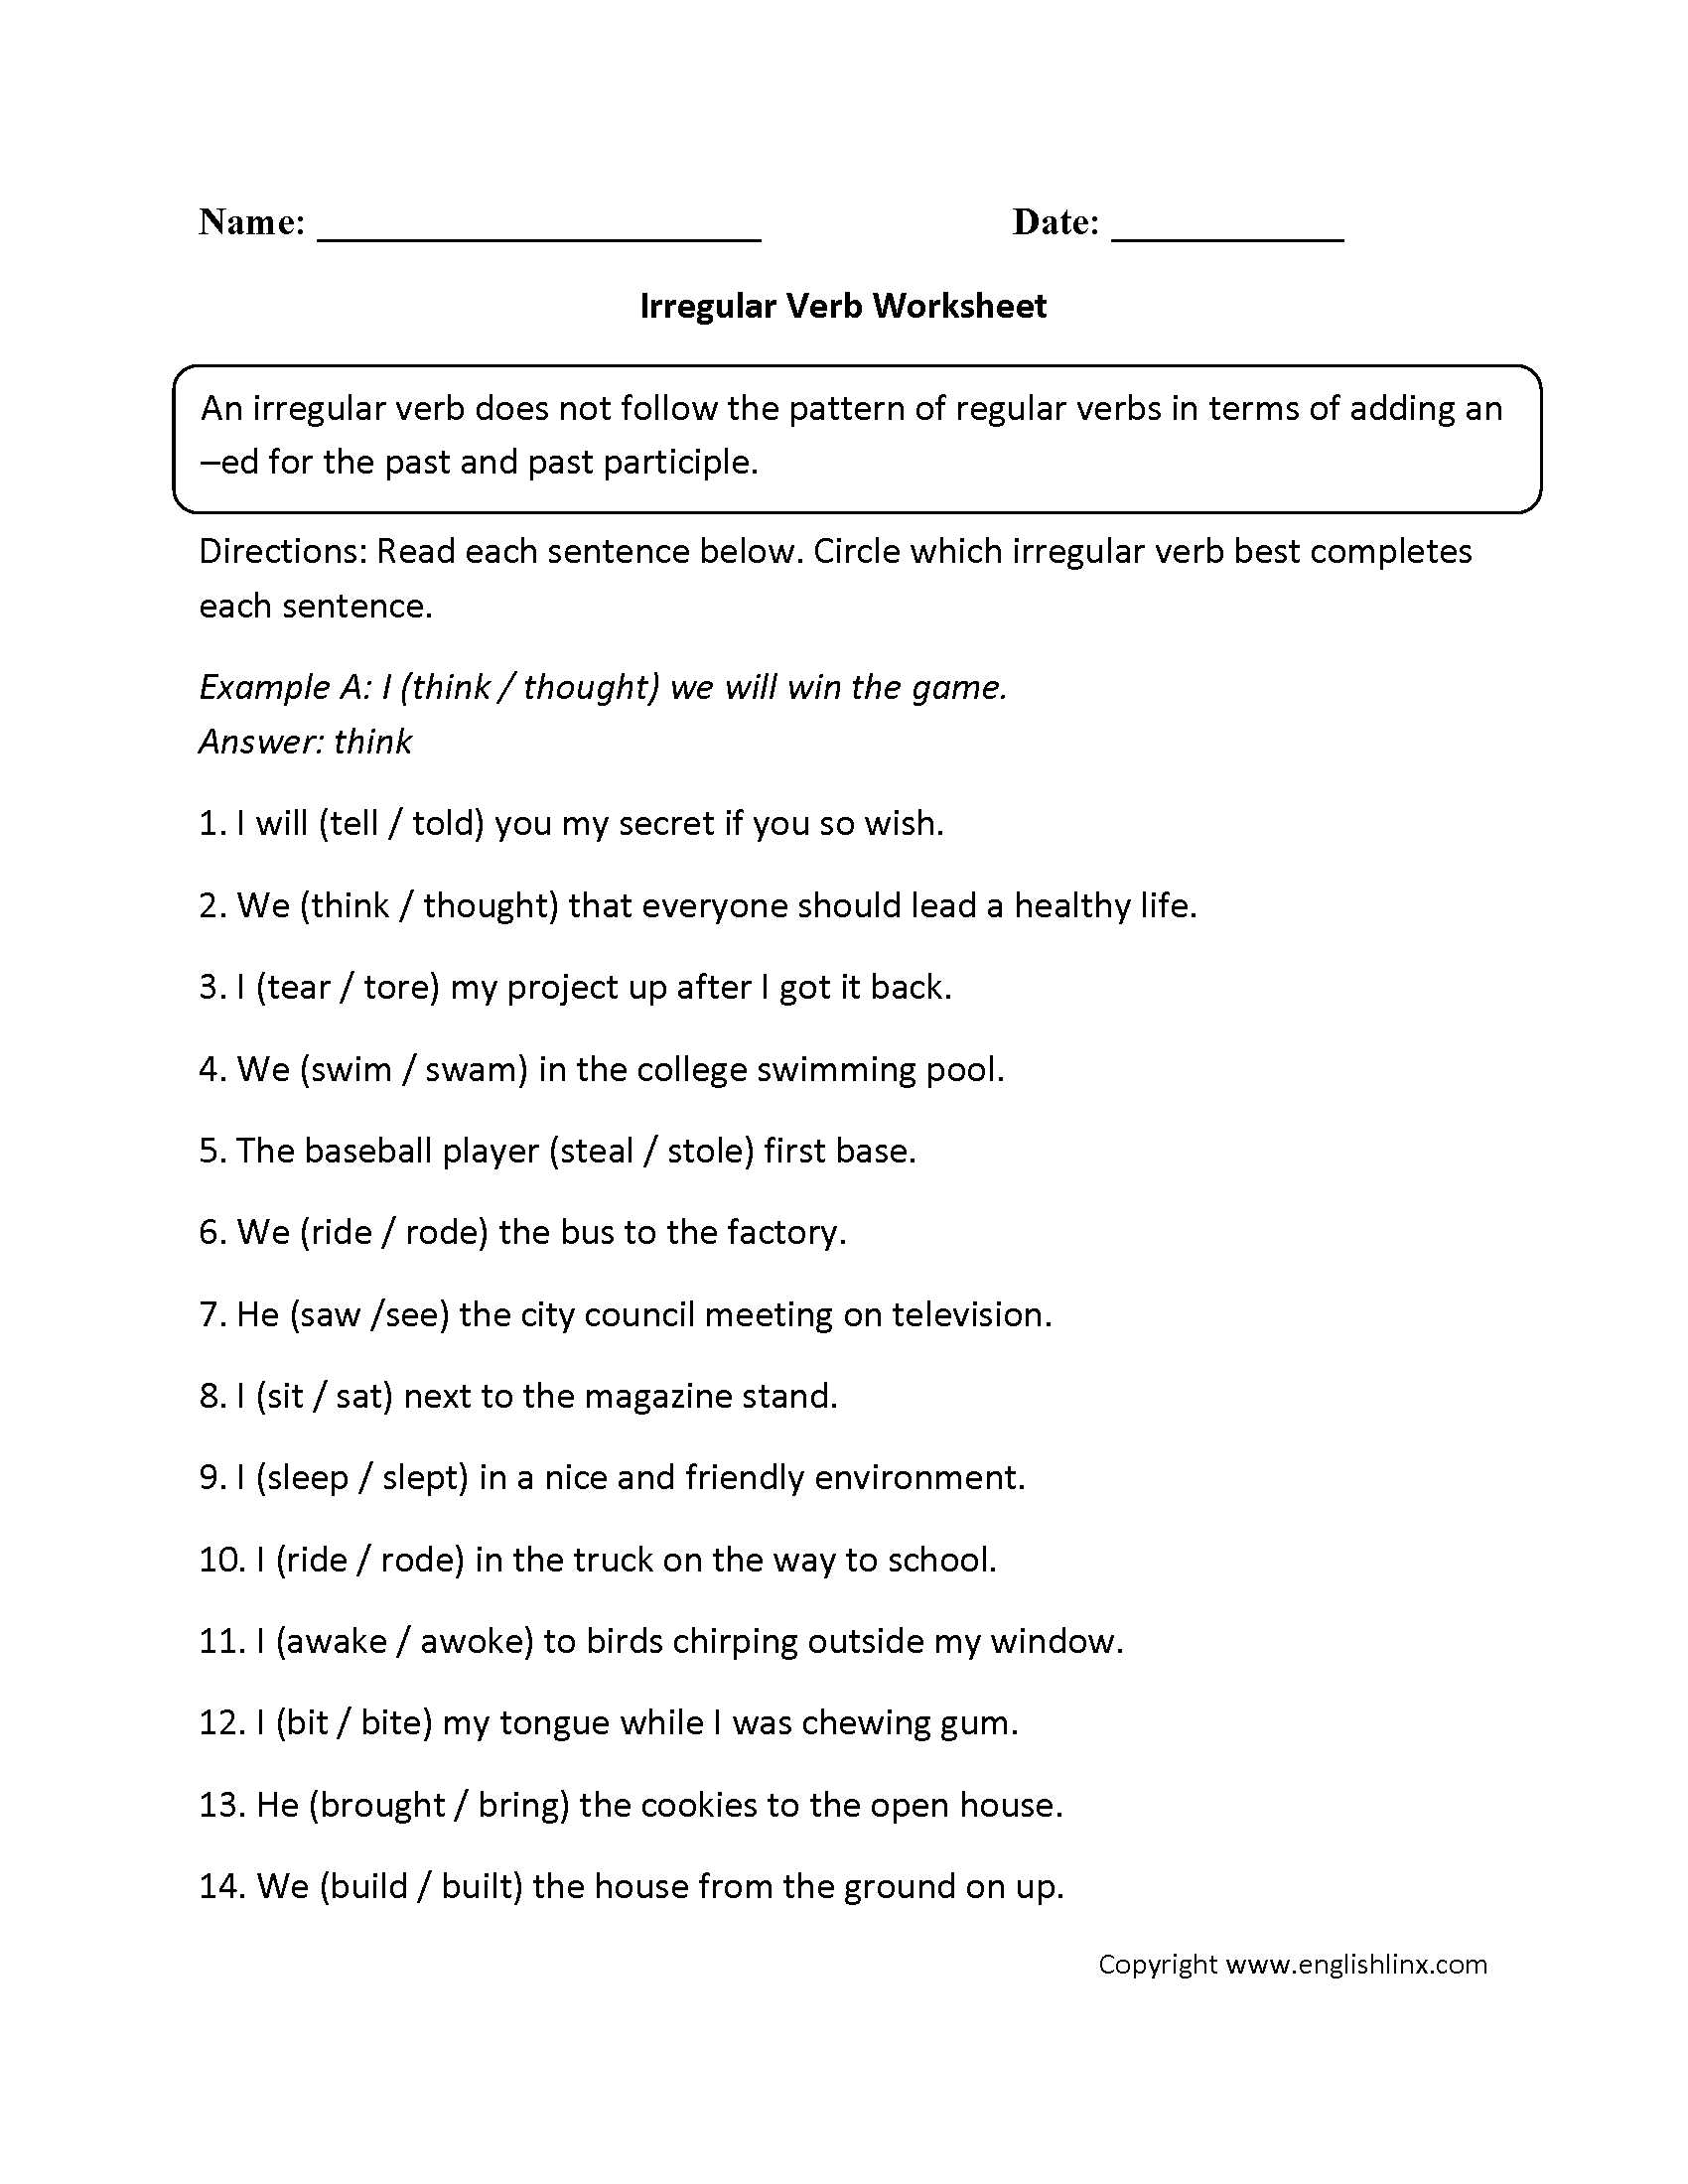 Secret Of Photo 51 Worksheet Answers Also Puter Crossword Puzzles Pdf with Answers High Definition